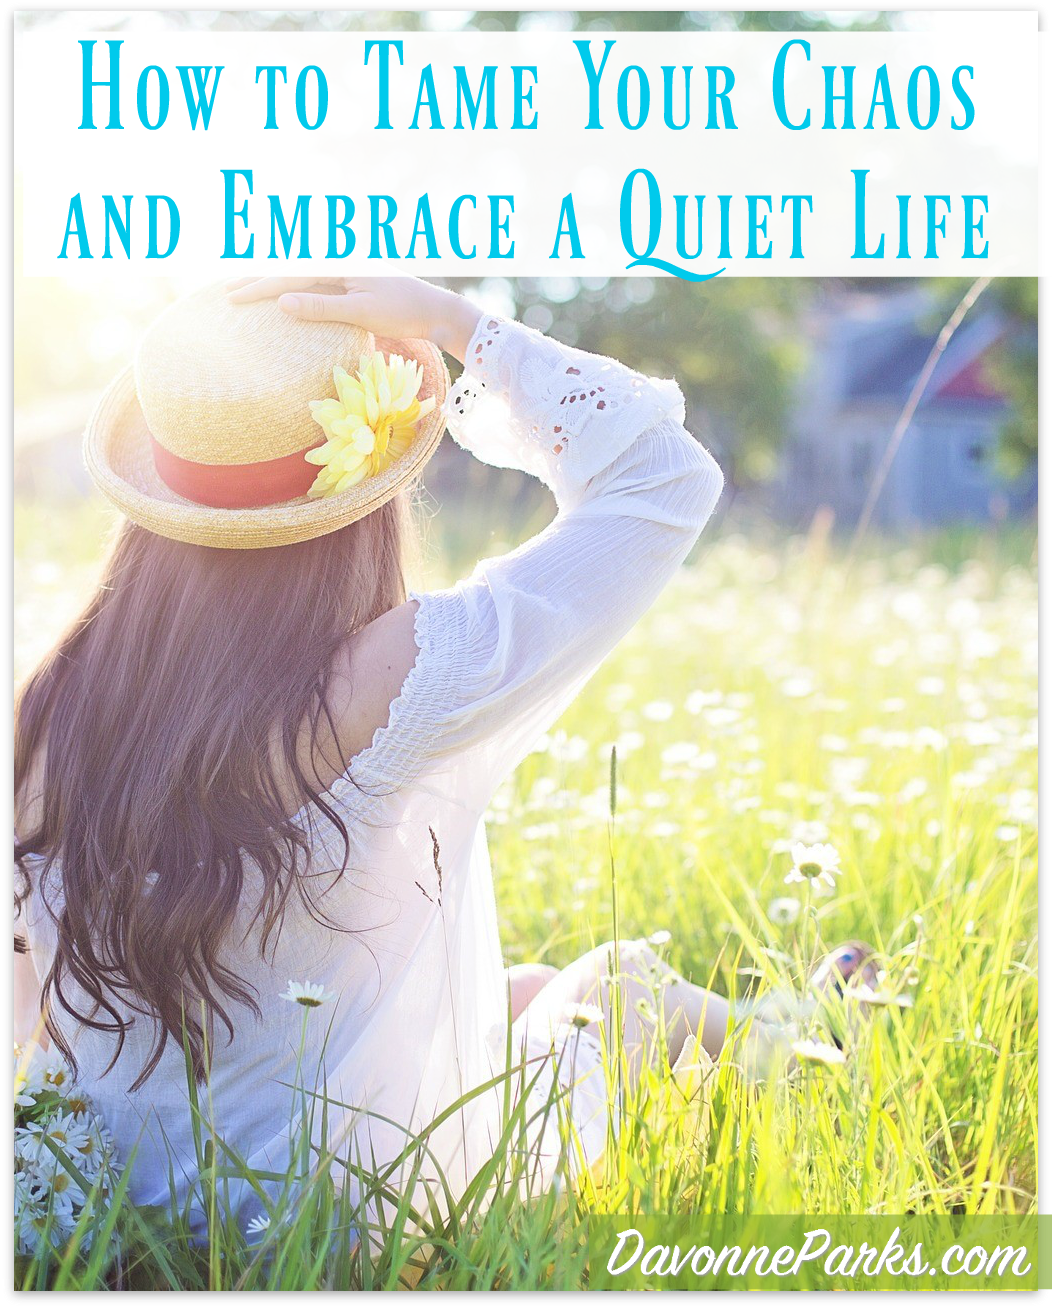 Are You Satisfied with a Quiet Life?